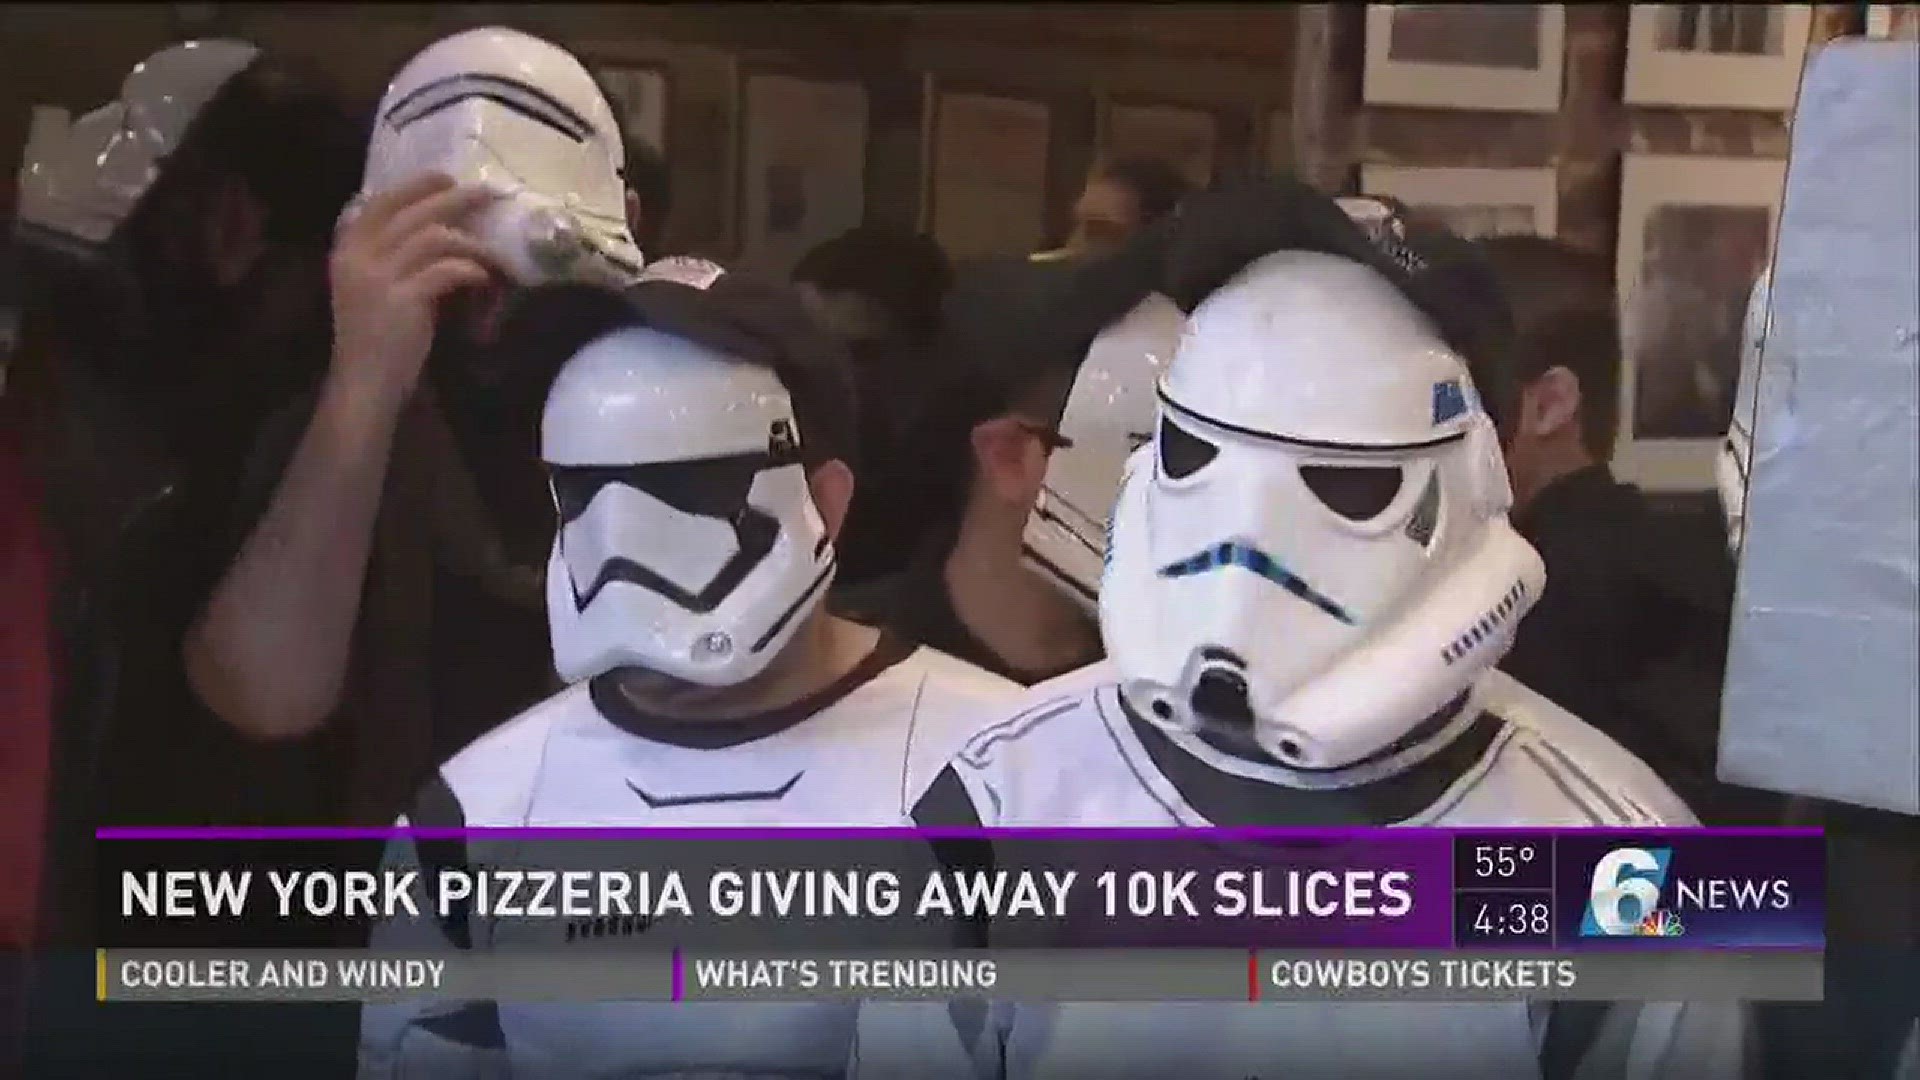 Star wars fans are gathering at a New York pizzeria to honor the late Carrie Fisher and her iconic role as Princess Leia.